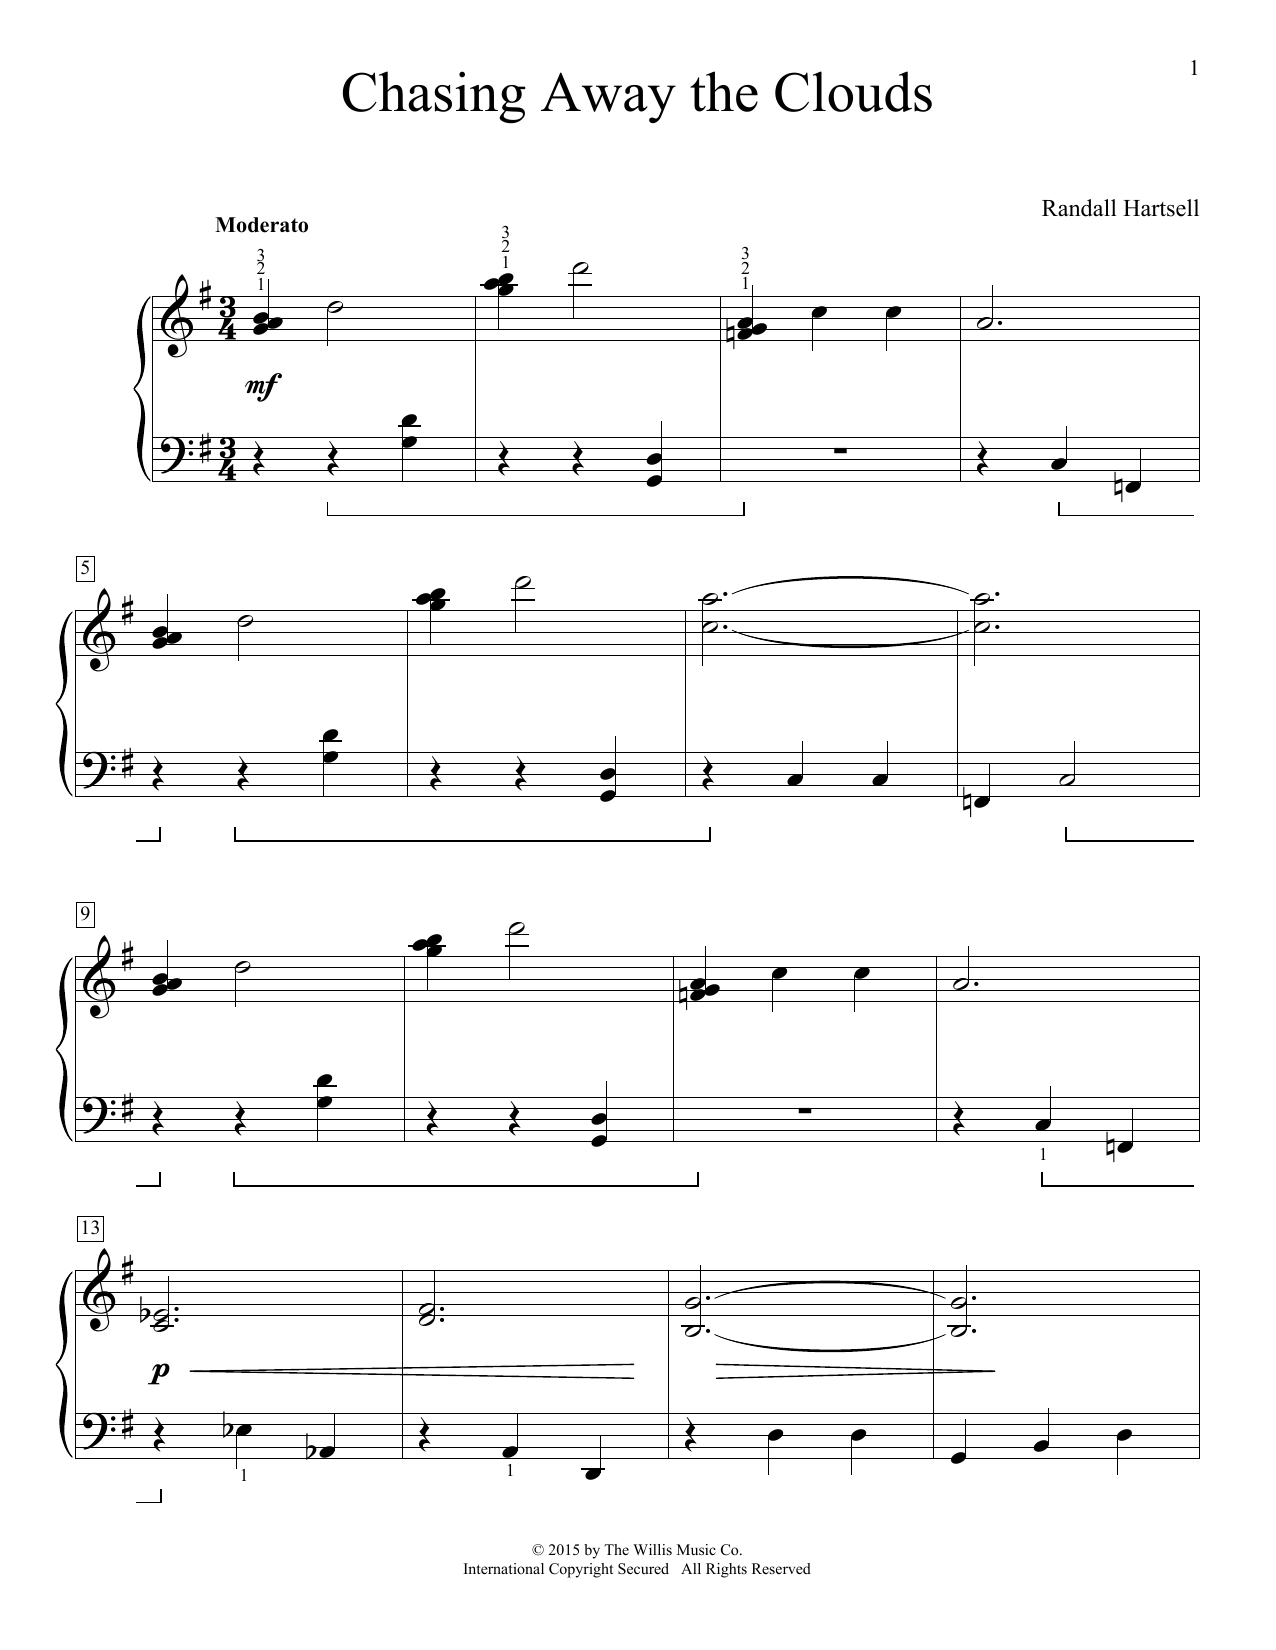 Download Randall Hartsell Chasing Away The Clouds Sheet Music